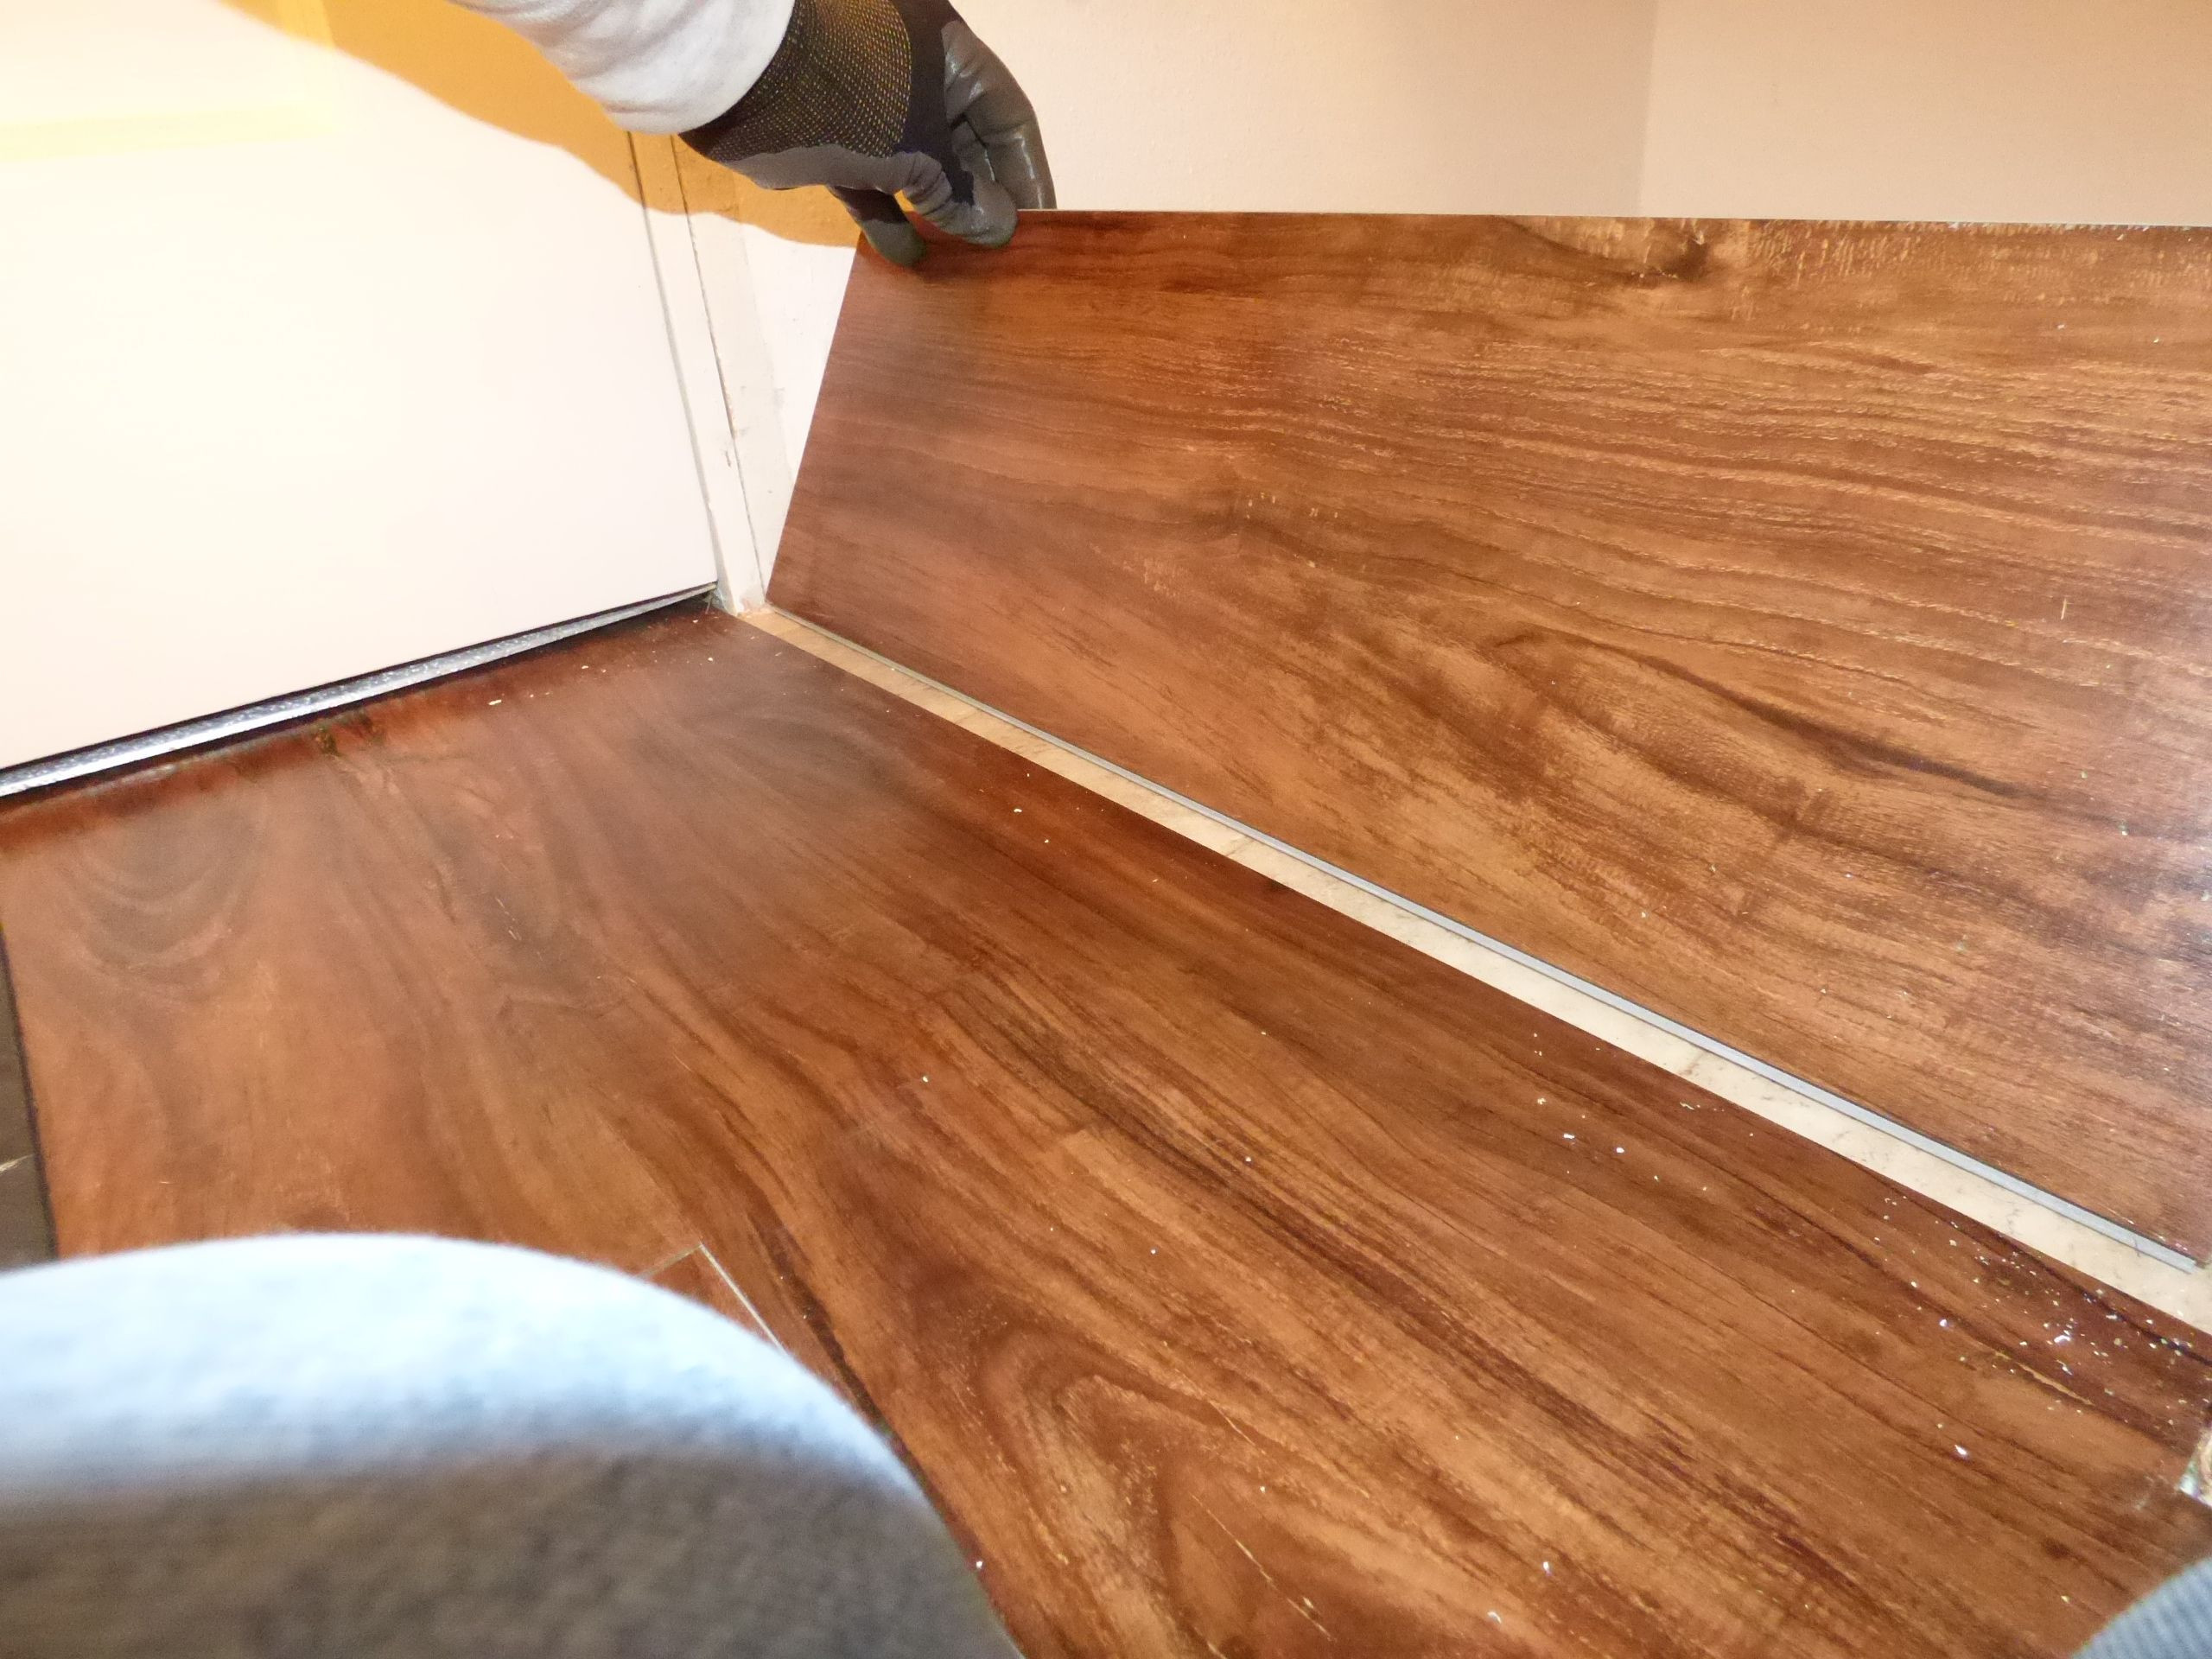 21 Fantastic How to Lay Hardwood Flooring Direction 2024 free download how to lay hardwood flooring direction of its easy and fast to install plank vinyl flooring in backwards installing plank flooring 56a4a0535f9b58b7d0d7e38e jpg